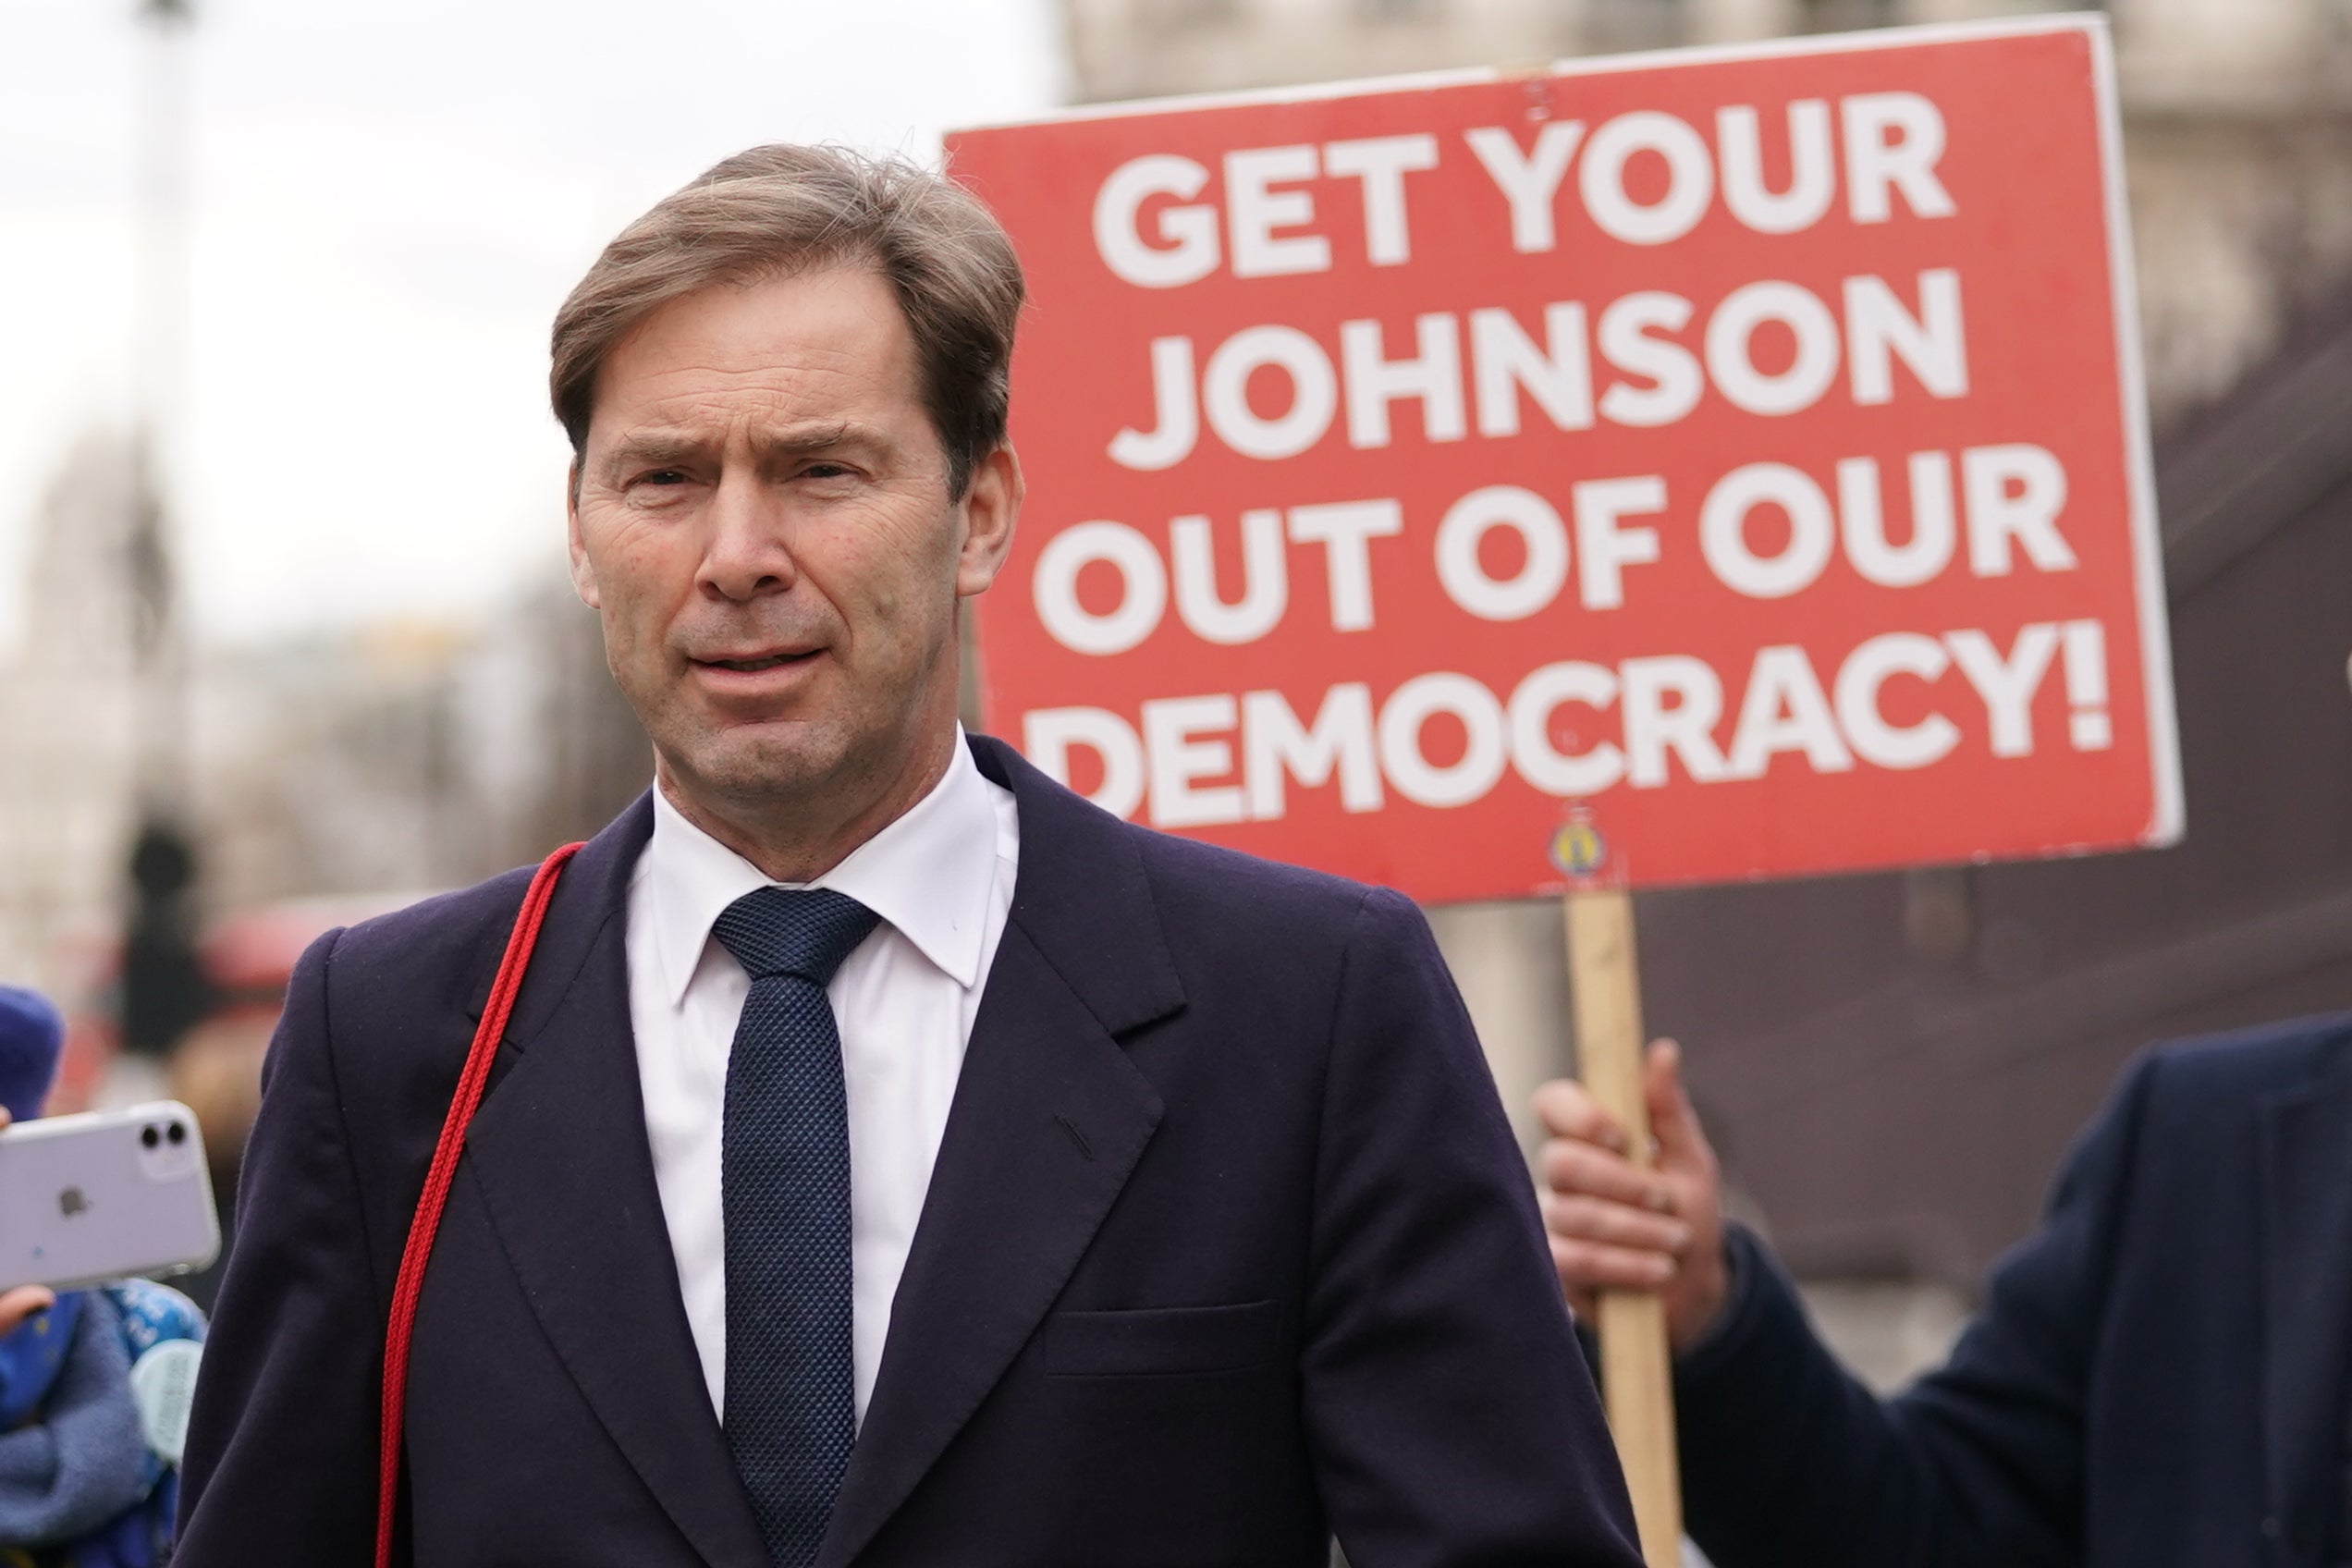 Former minister Tobias Ellwood has been vocal of waning support for Boris Johnson